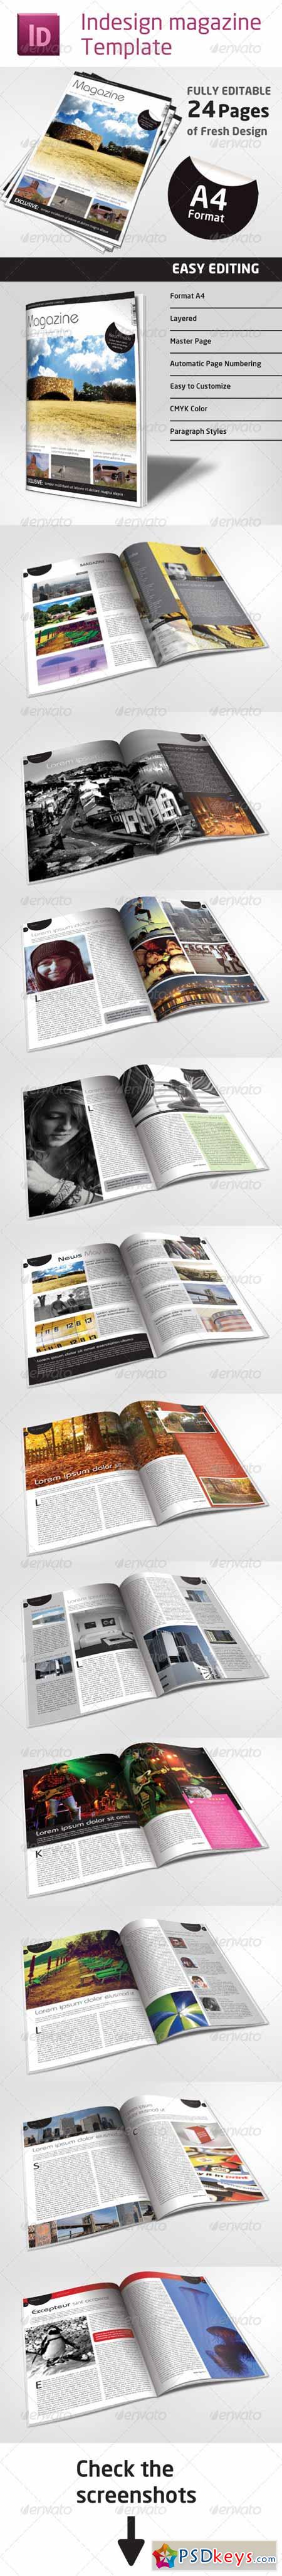 24 Pages Magazine Template in A4 Format 2399637